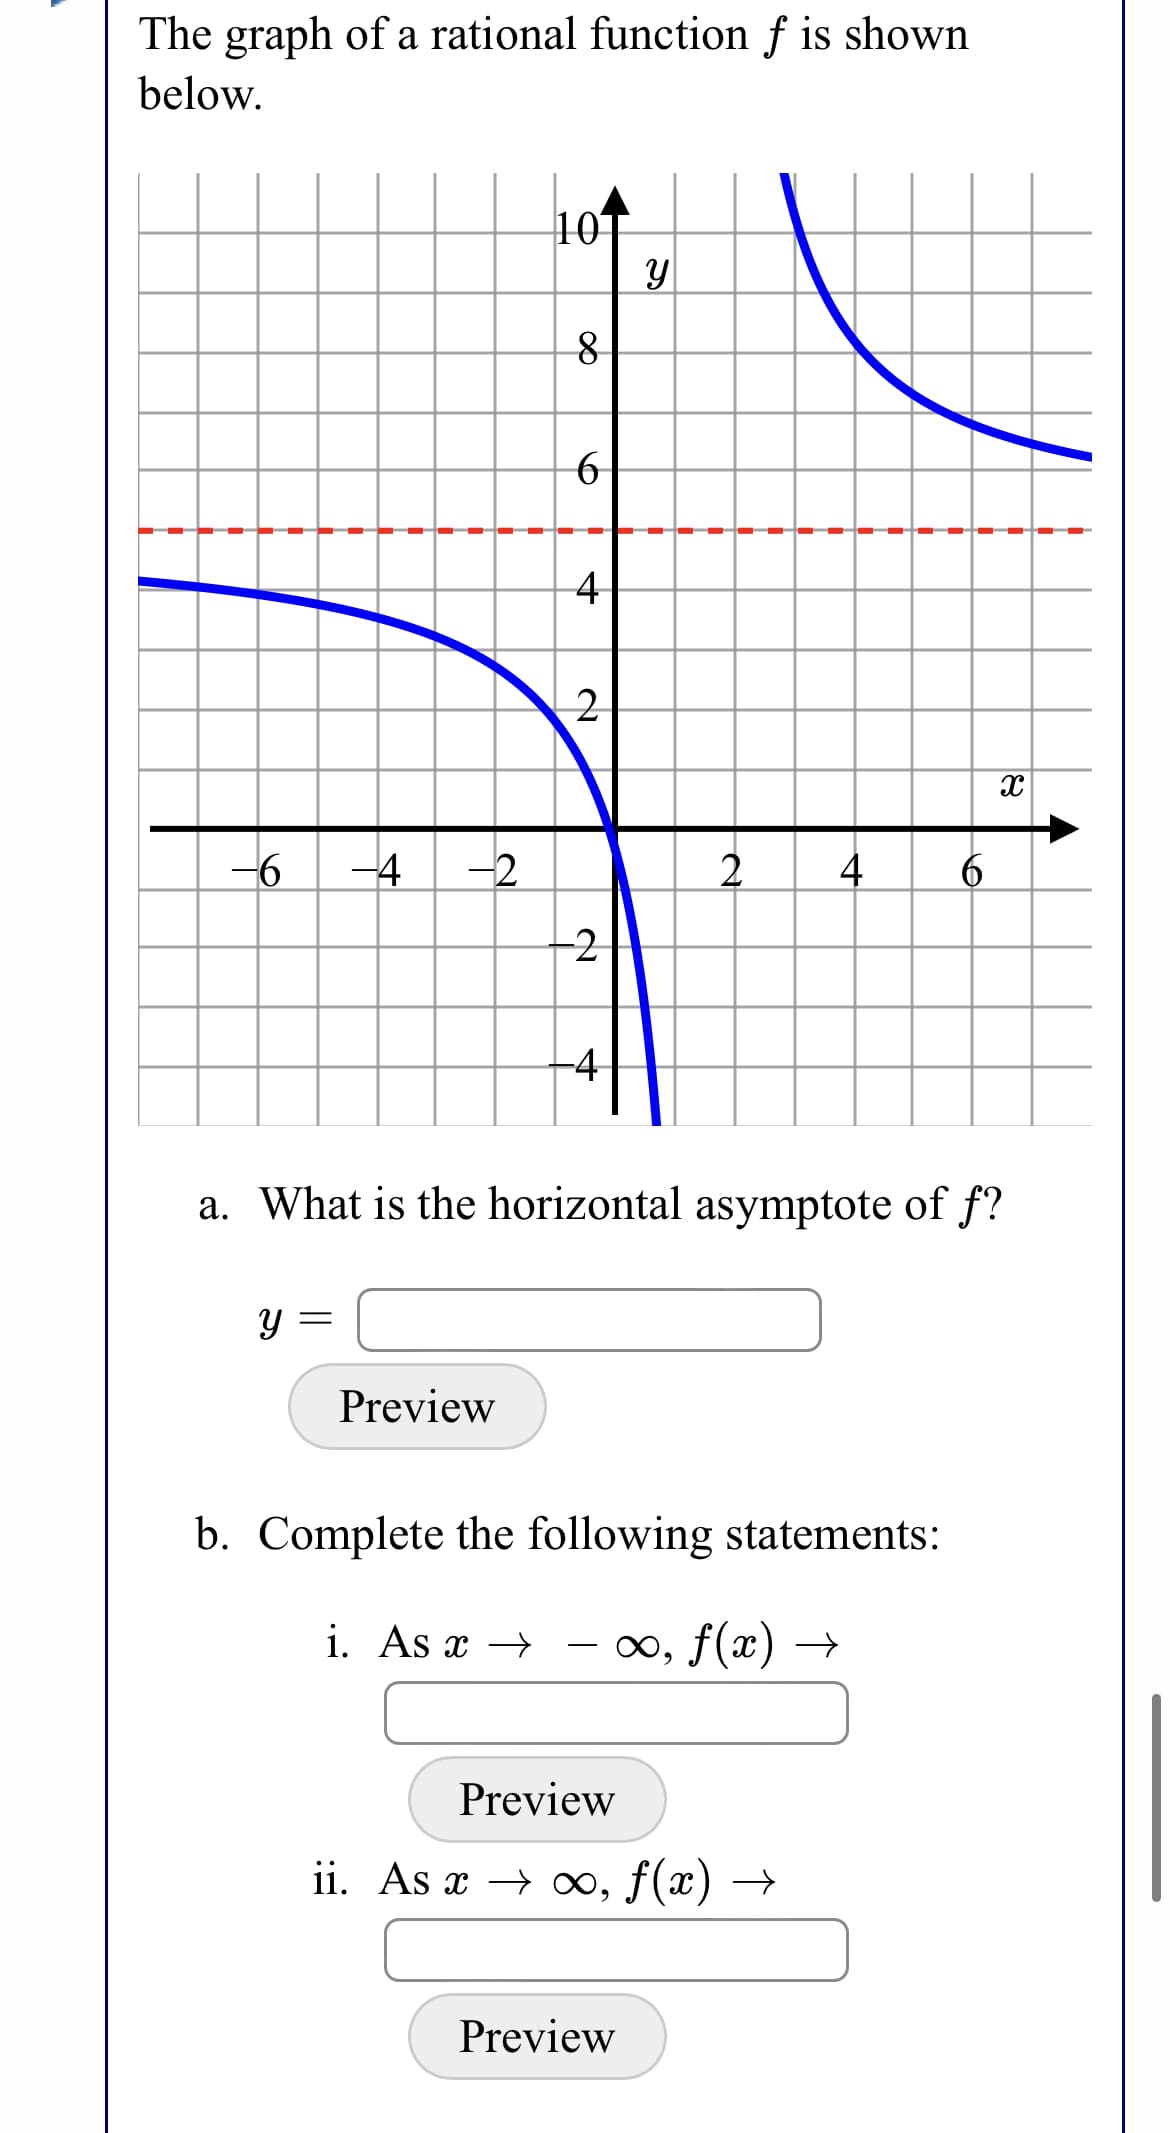 The graph of a rational function f is shown
below.
10T
4
-6
-4
-2
2.
-2
-4
a. What is the horizontal asymptote of f?
Y =
Preview
b. Complete the following statements:
i. As x →
0o, f(x) →
Preview
ii. As x → ∞, f(x) →
Preview
A
to
4.
నా
위
